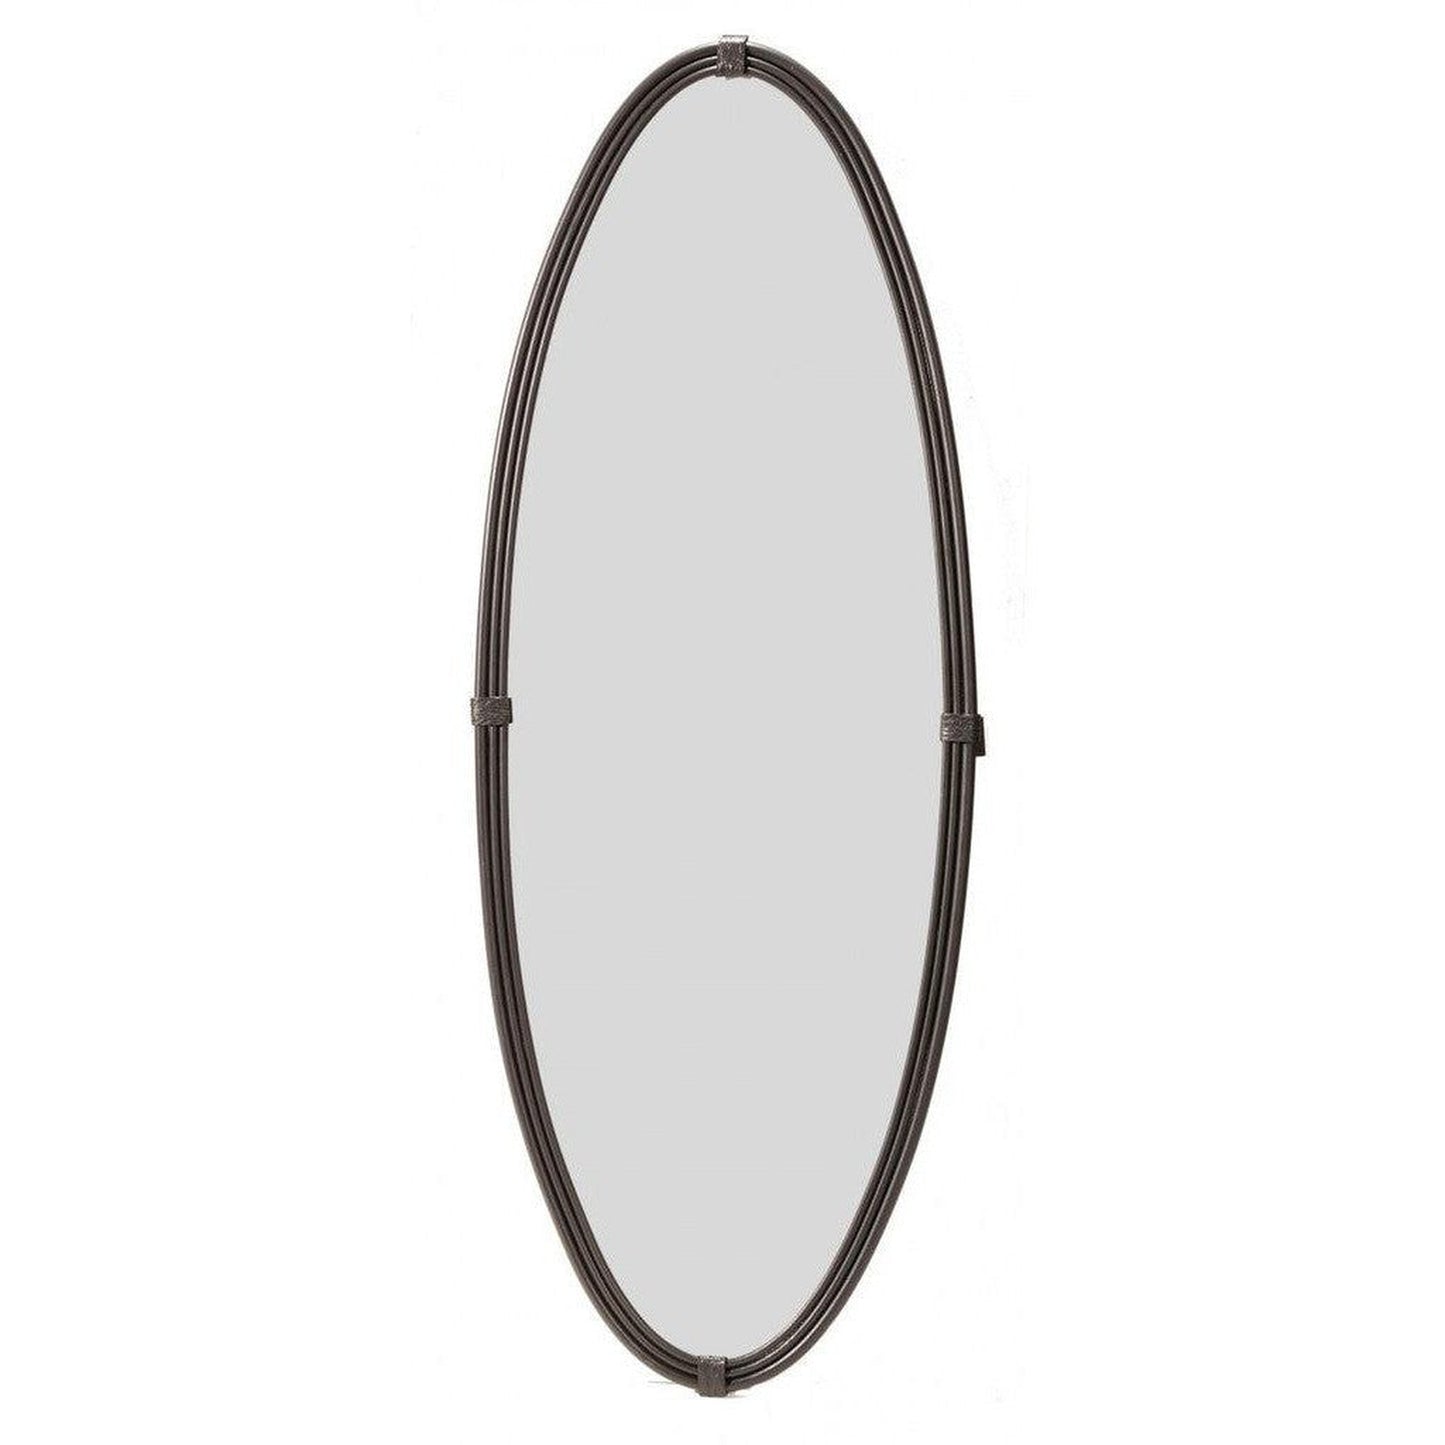 Stone County Ironworks Queensbury 25" Small Chalk White Oval Iron Wall Mirror